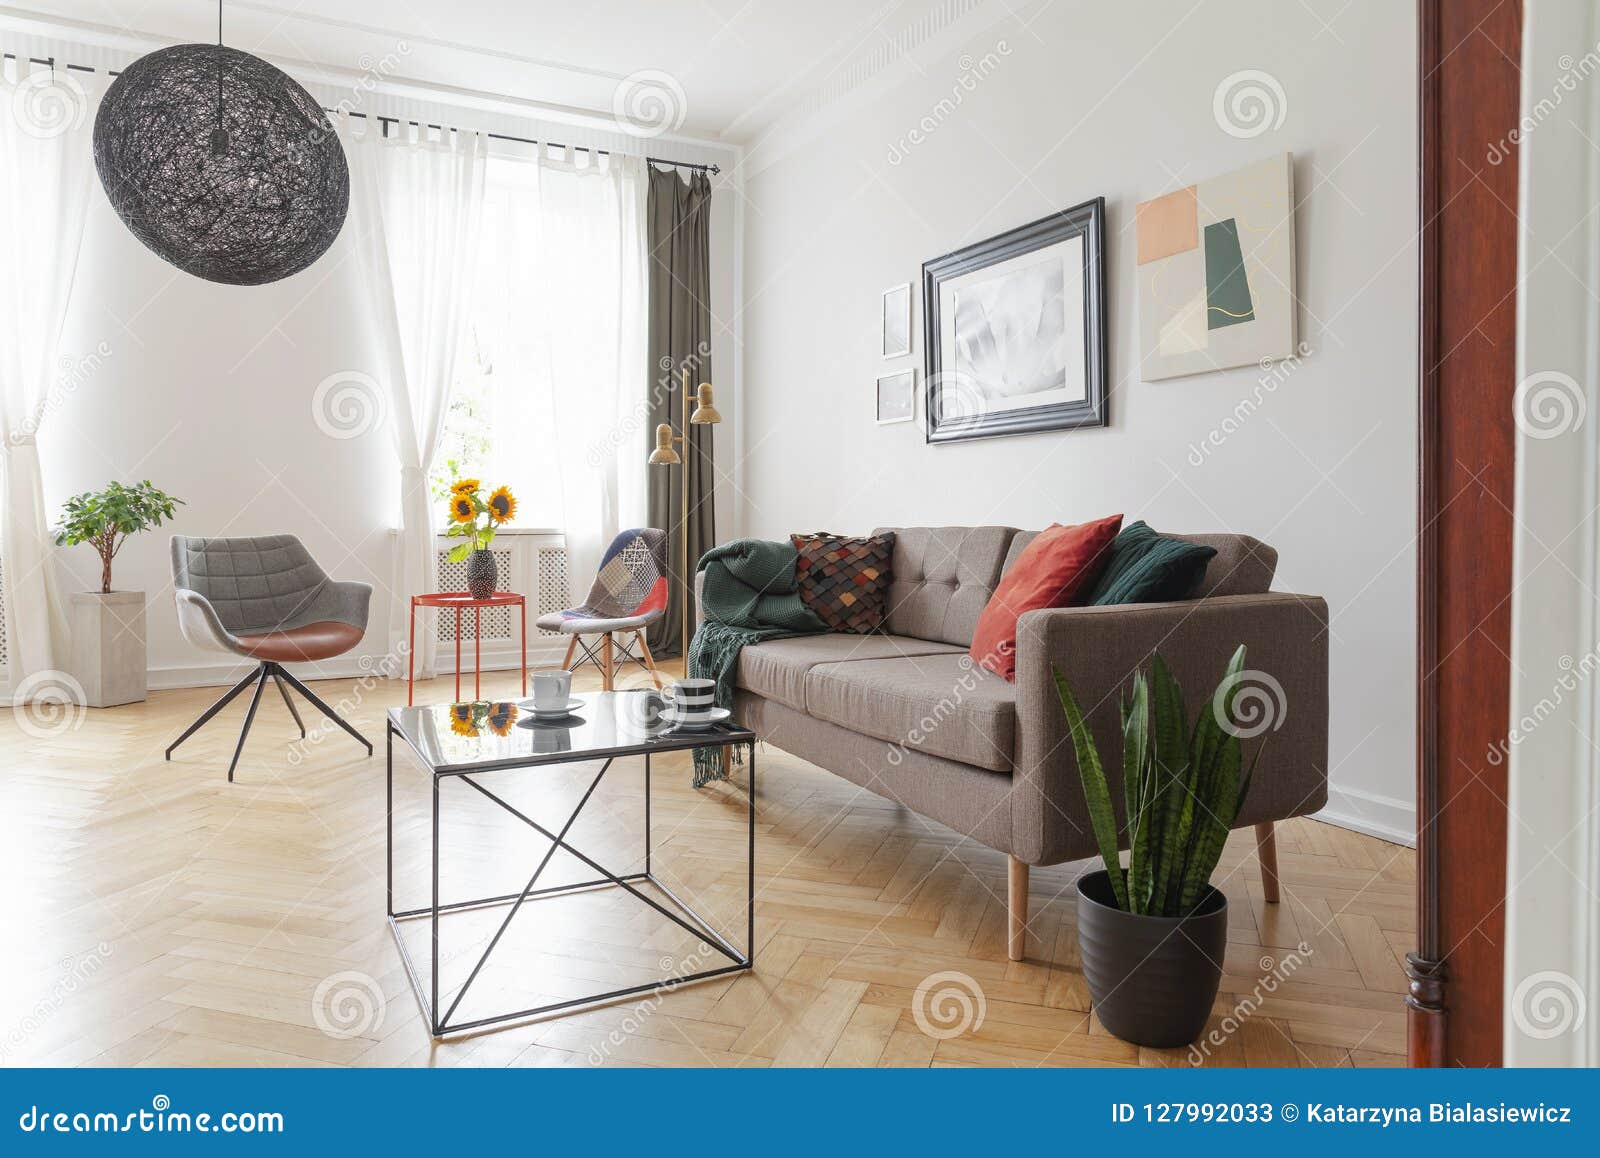 Table Next To Settee And Plant In Living Room Interior 